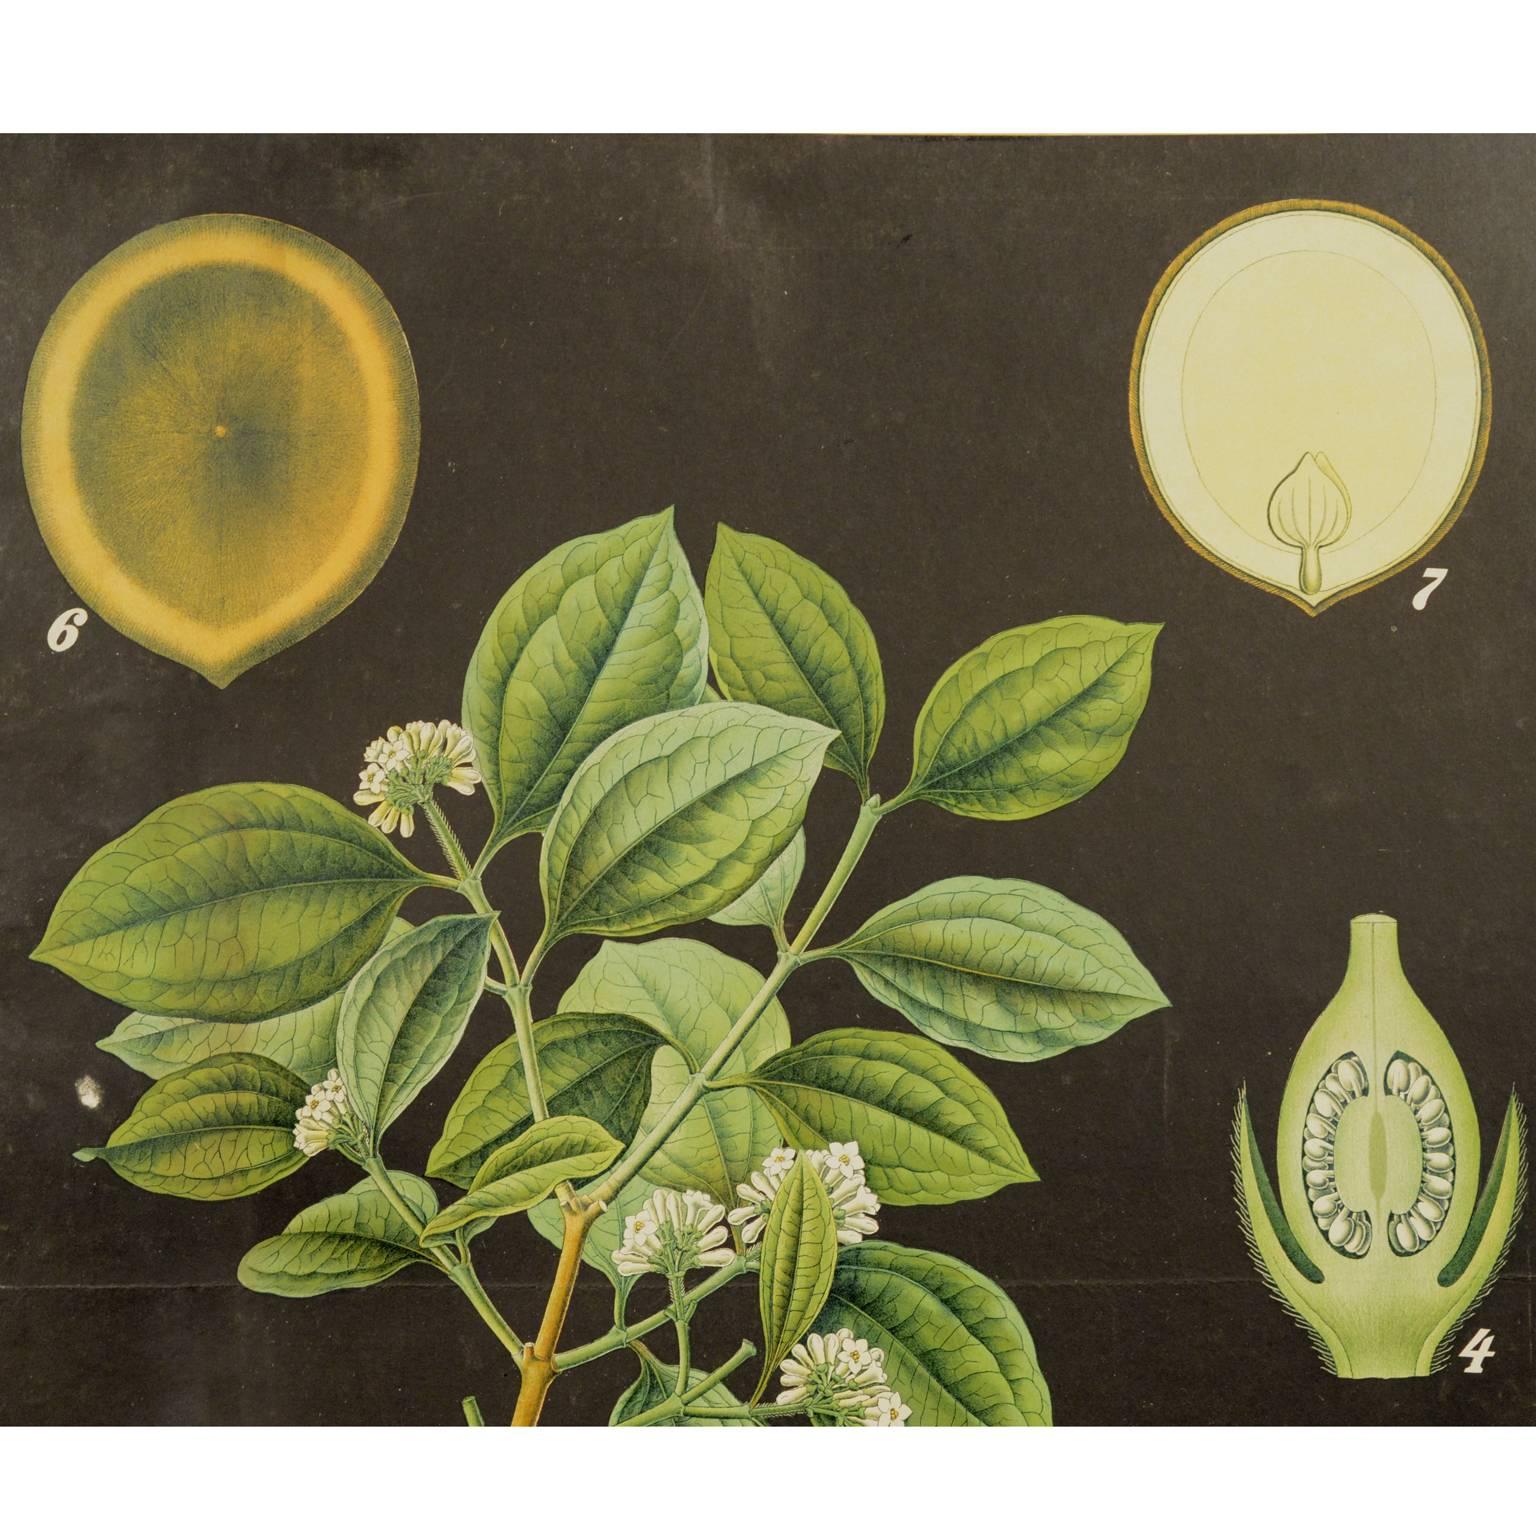 Colored lithograph on light cardboard depicting a botanical study with various sections of the Strychnos nux vomica L. Bohemian manufacture of the thirties. The black and light colours make the board very elegant and refined. With frame 51x1.8x72 cm.